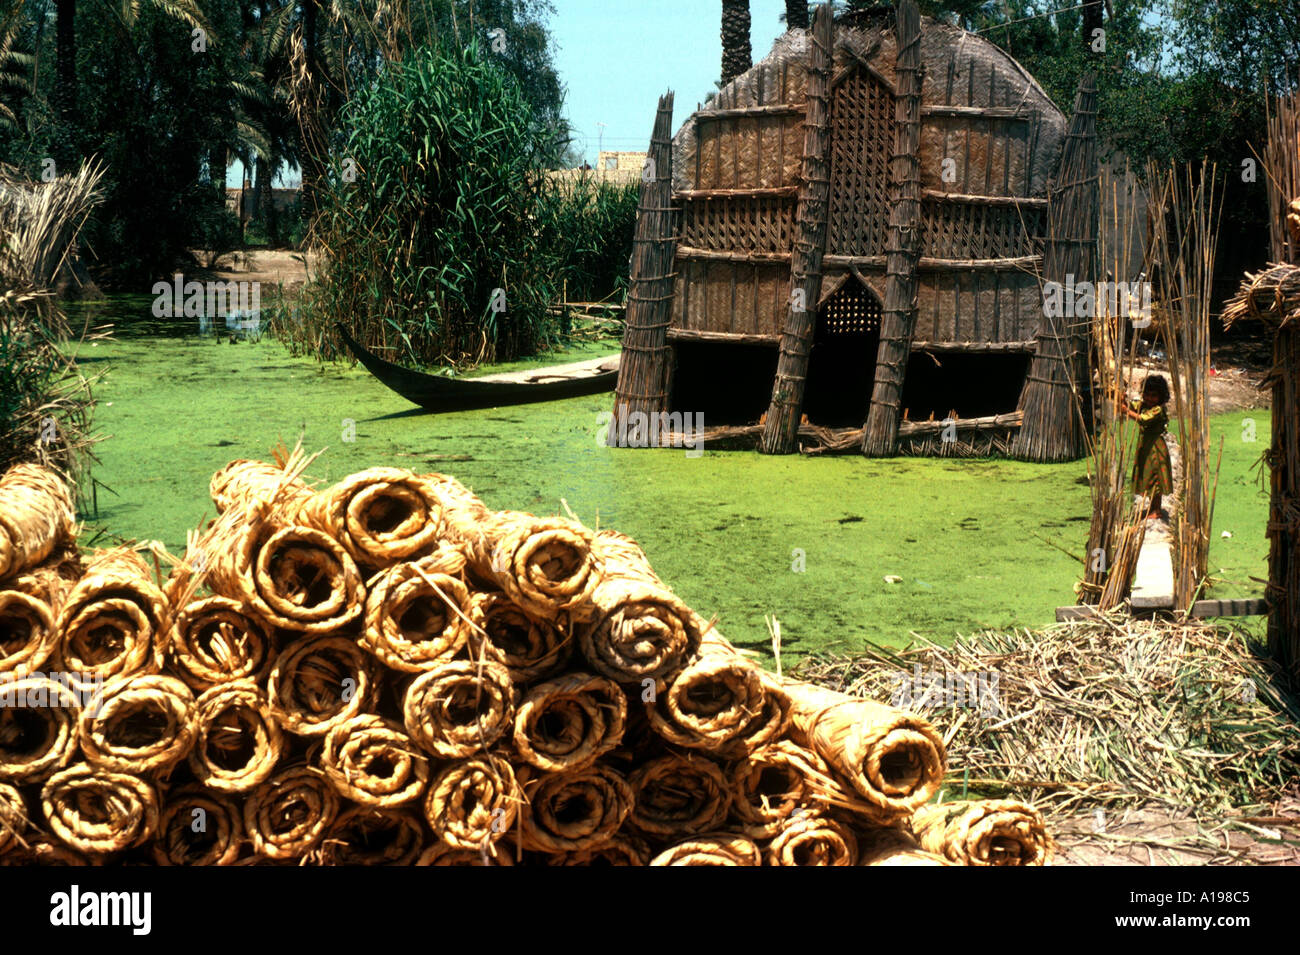 Mudhif house and reed mats ready for sale Chobaish Marshes Iraq Middle East V Theakston Stock Photo